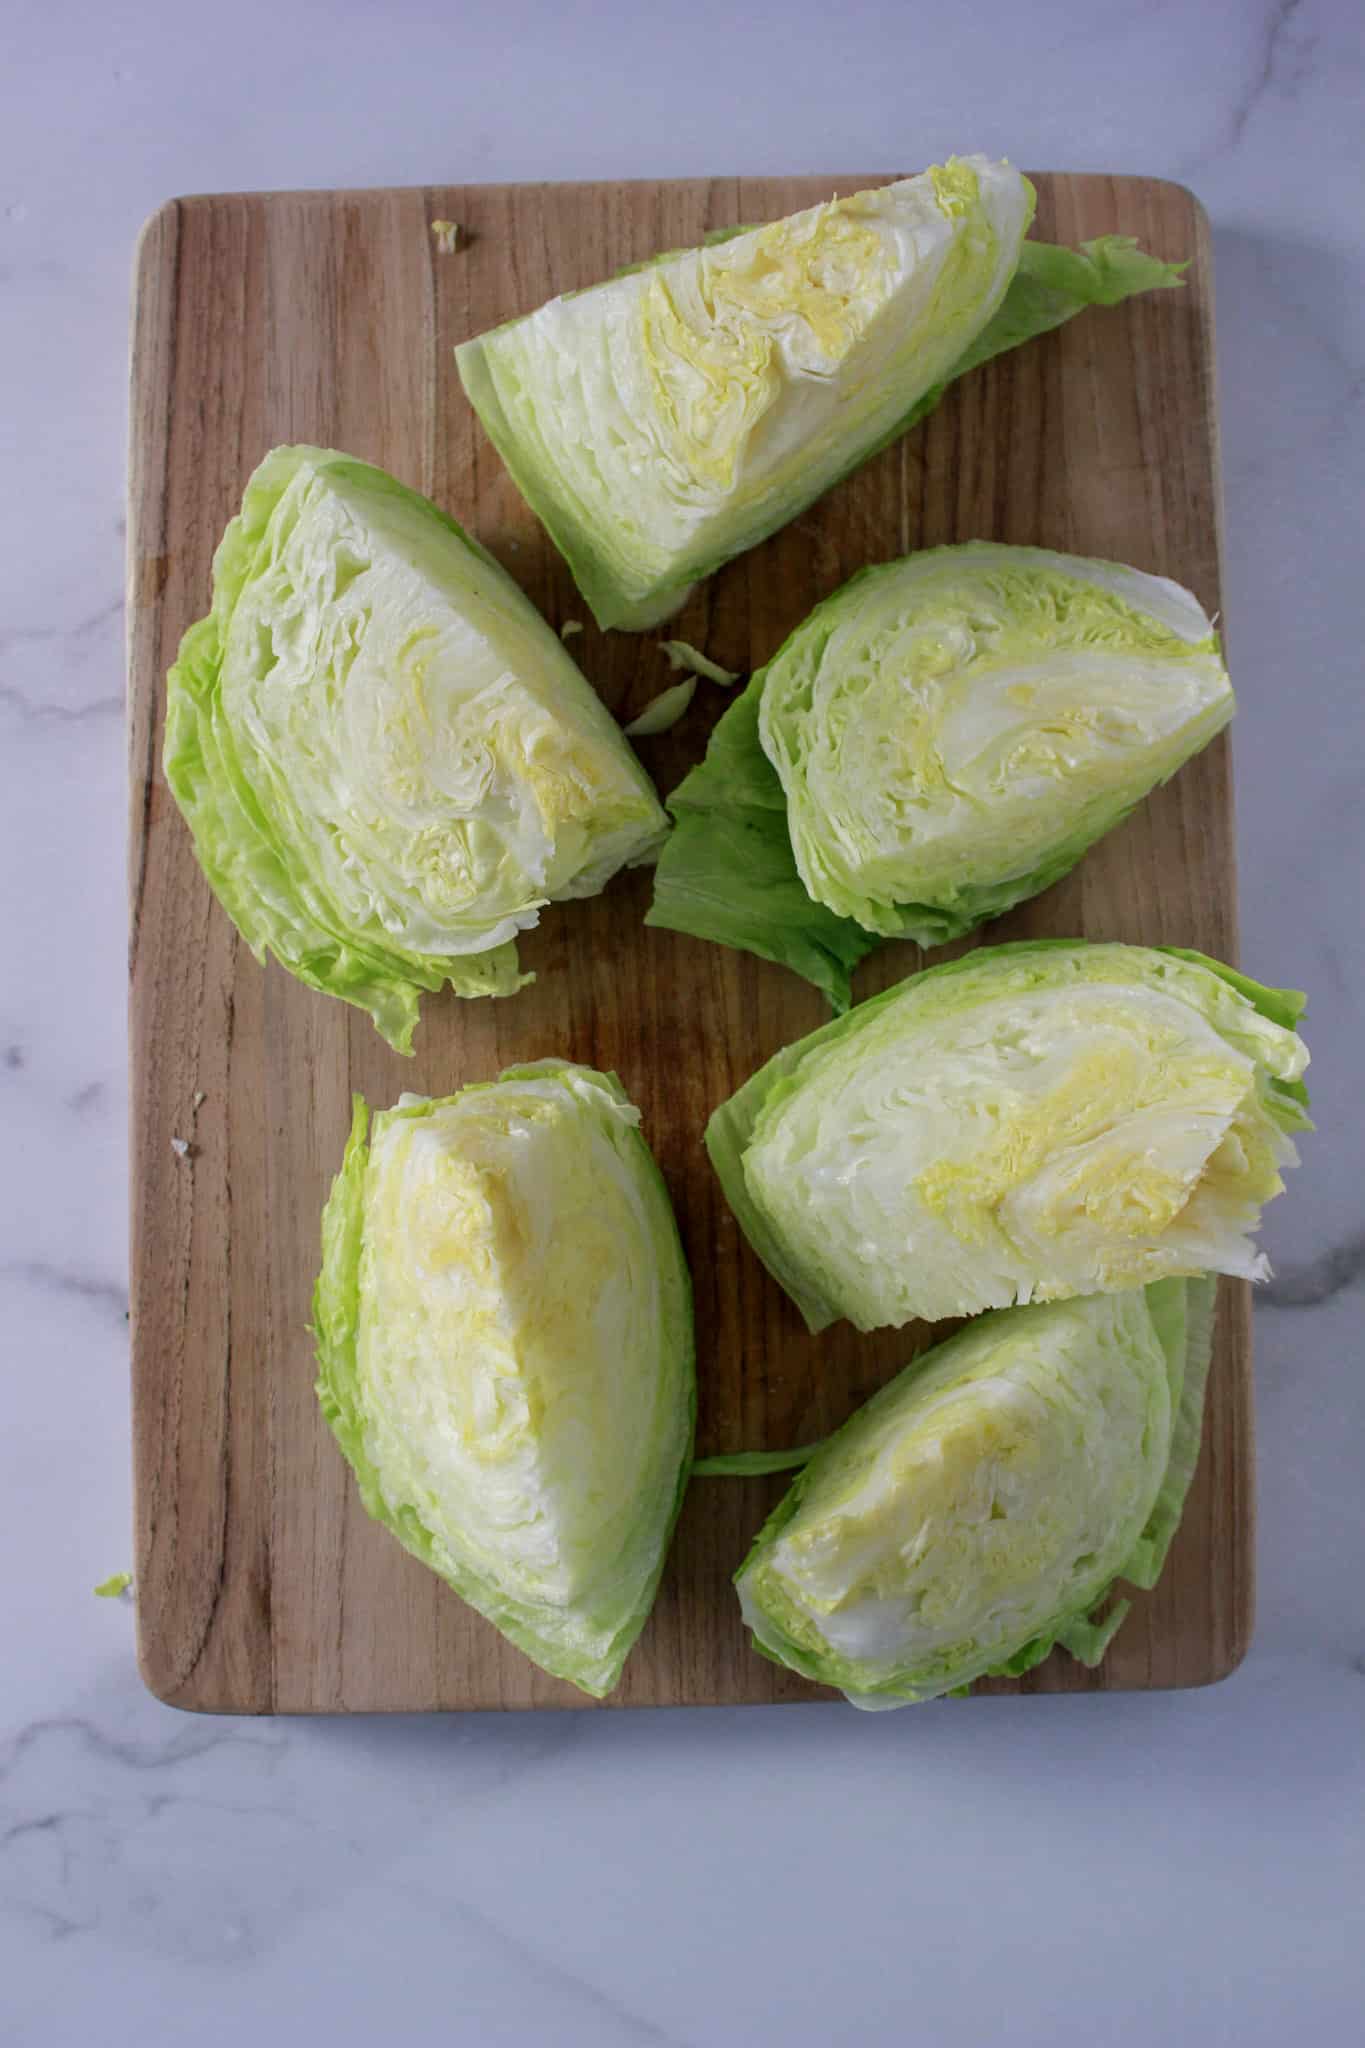 A head of iceberg lettuce on a wooden board cut in to six wedges for a classic wedge salad.